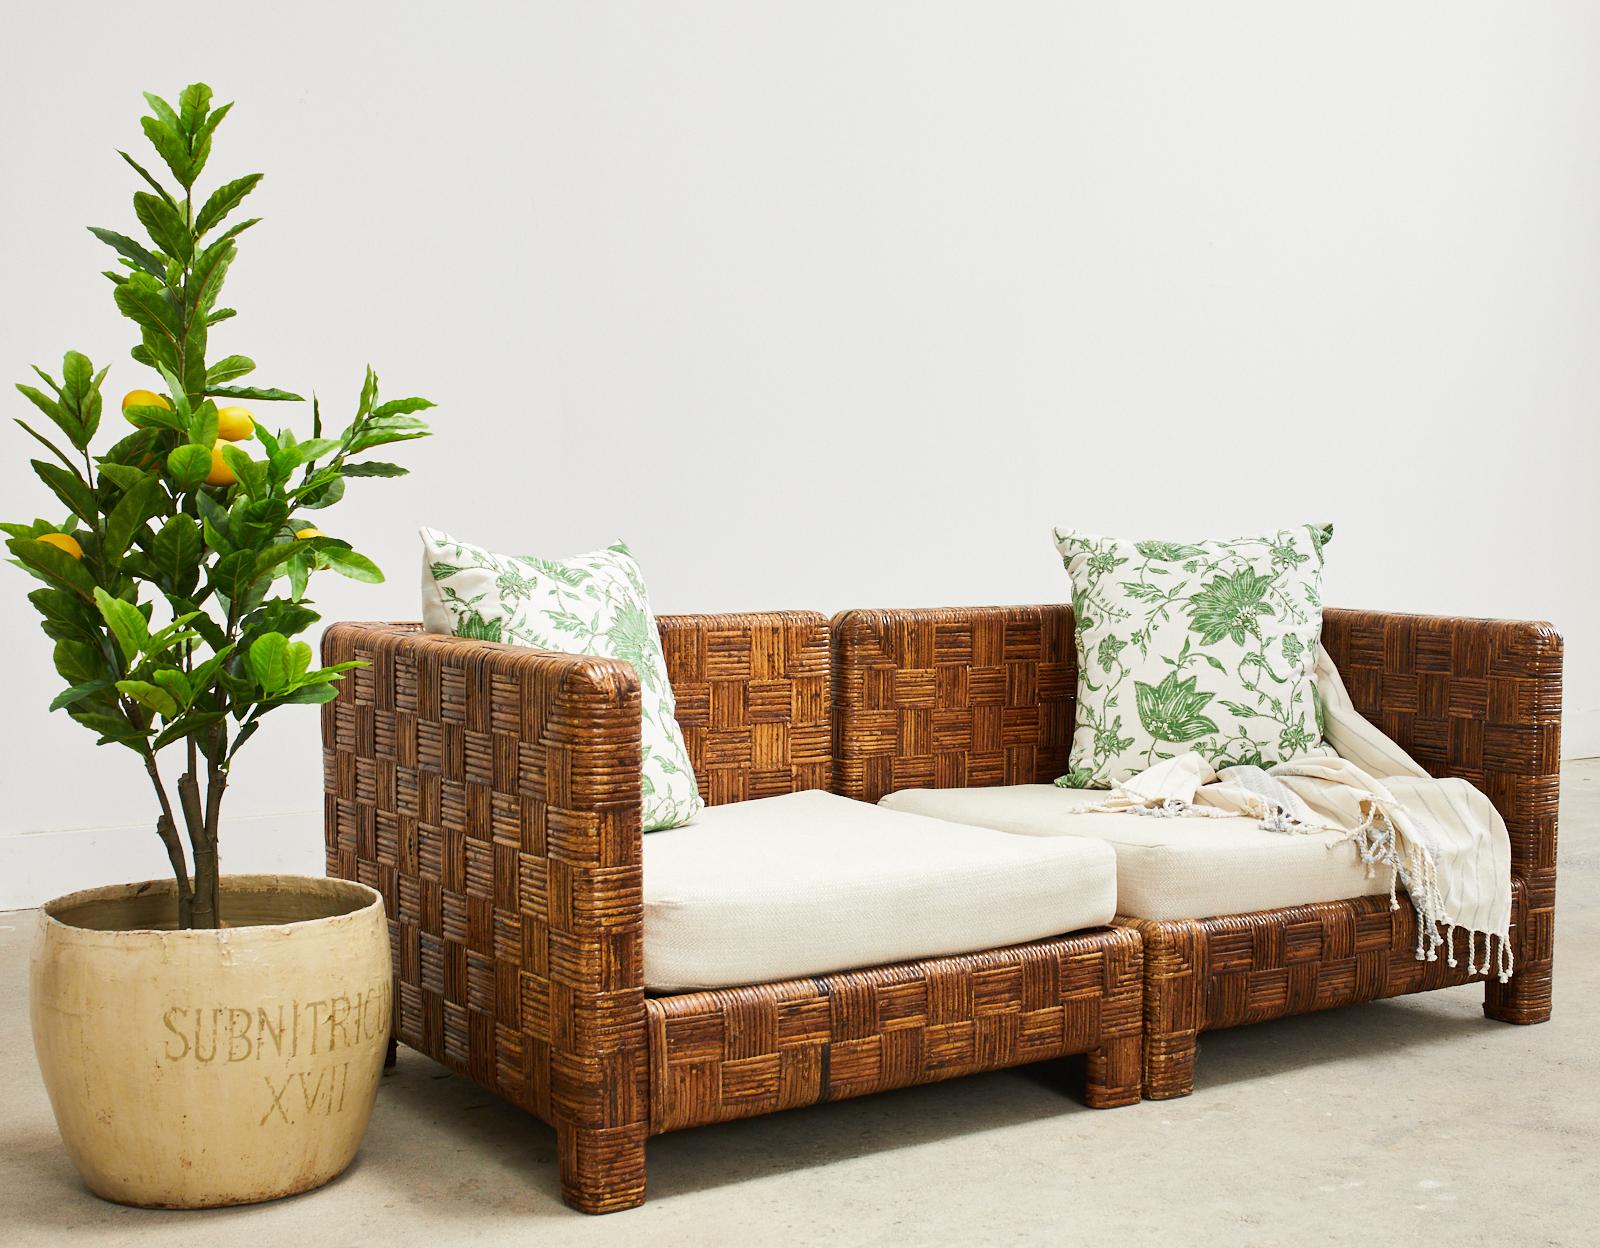 Stylish cane basketweave two-part parsons sofa or settee made in the style and manner of Billy Baldwin. Beautifully crafted from a wood frame embellished in a geometric pattern cane basketweave. Each cube shaped section measures 32 inches wide and